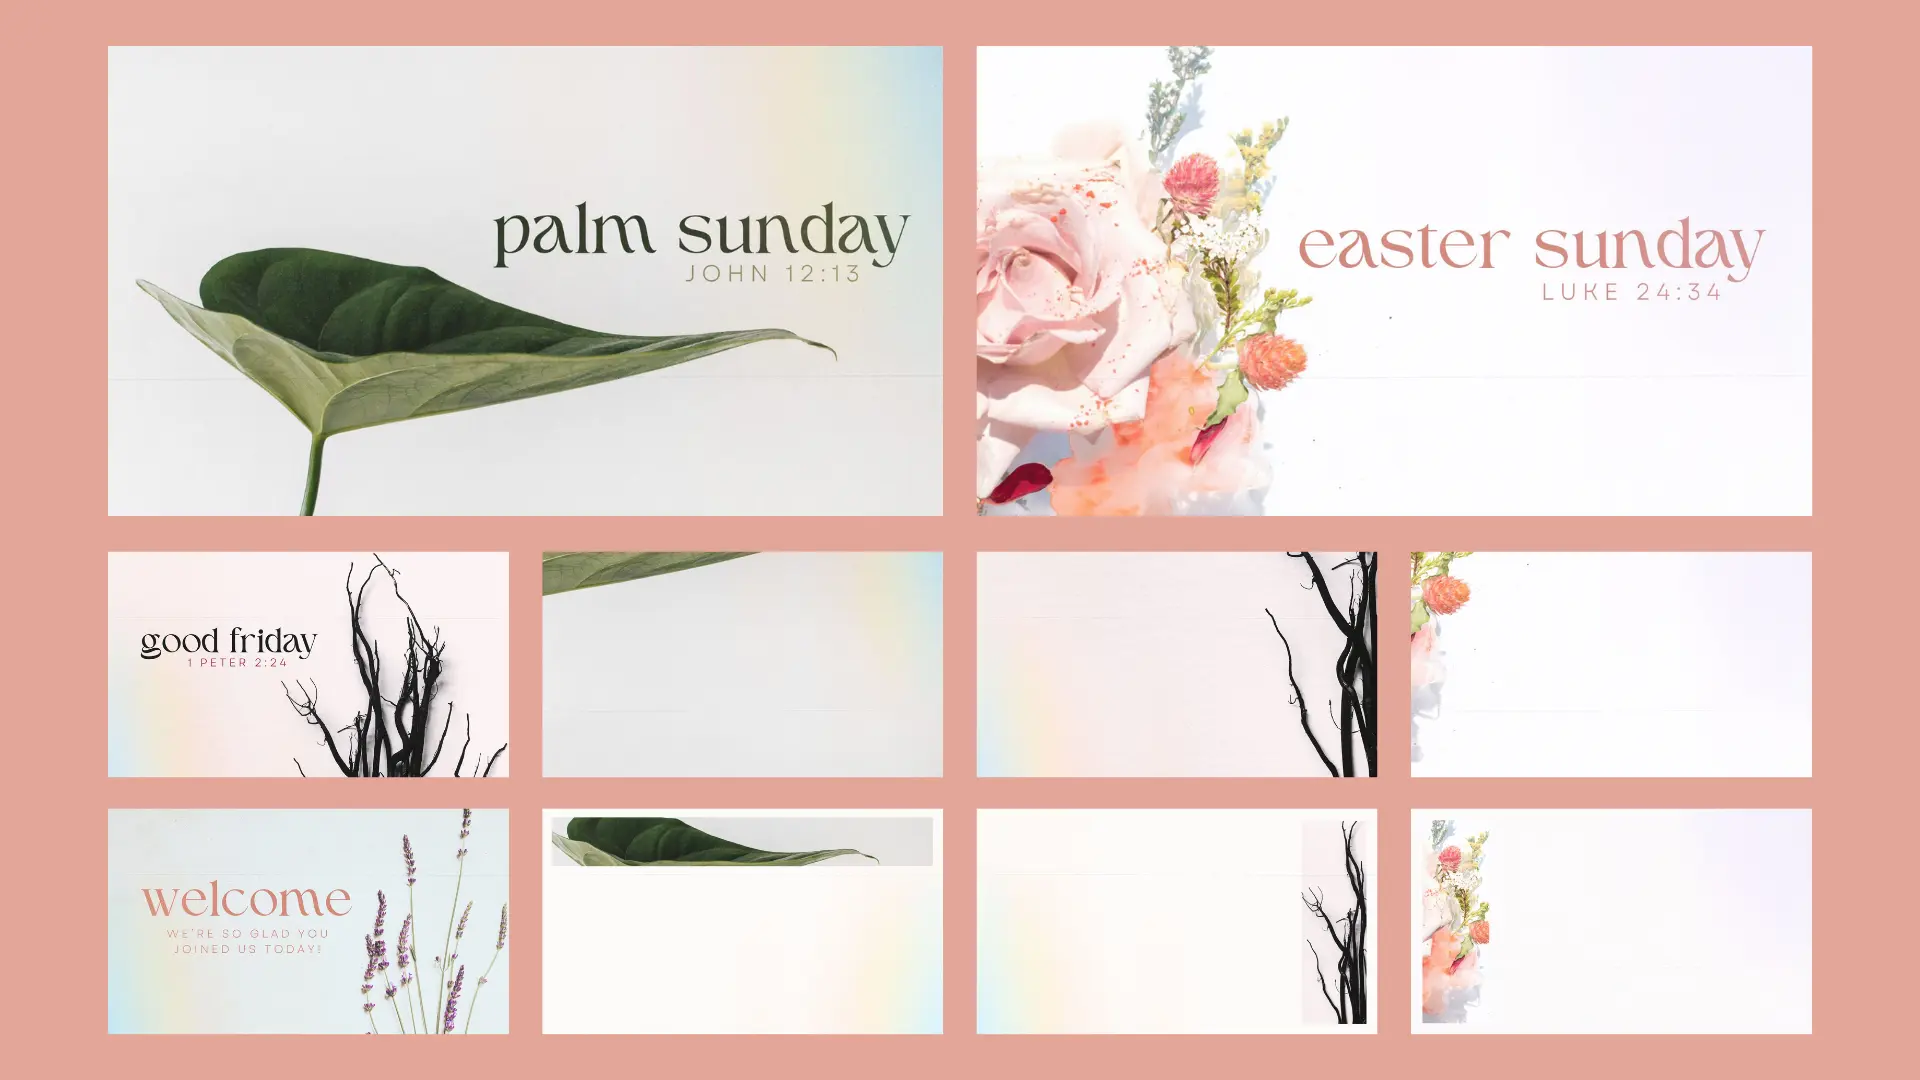 This Serene And Elegant Church Canva Slide Pack Captures The Spirit Of Holy Week With A Focus On Palm Sunday, Easter Sunday, And Good Friday, Complemented By A Warm Welcome For Attendees.